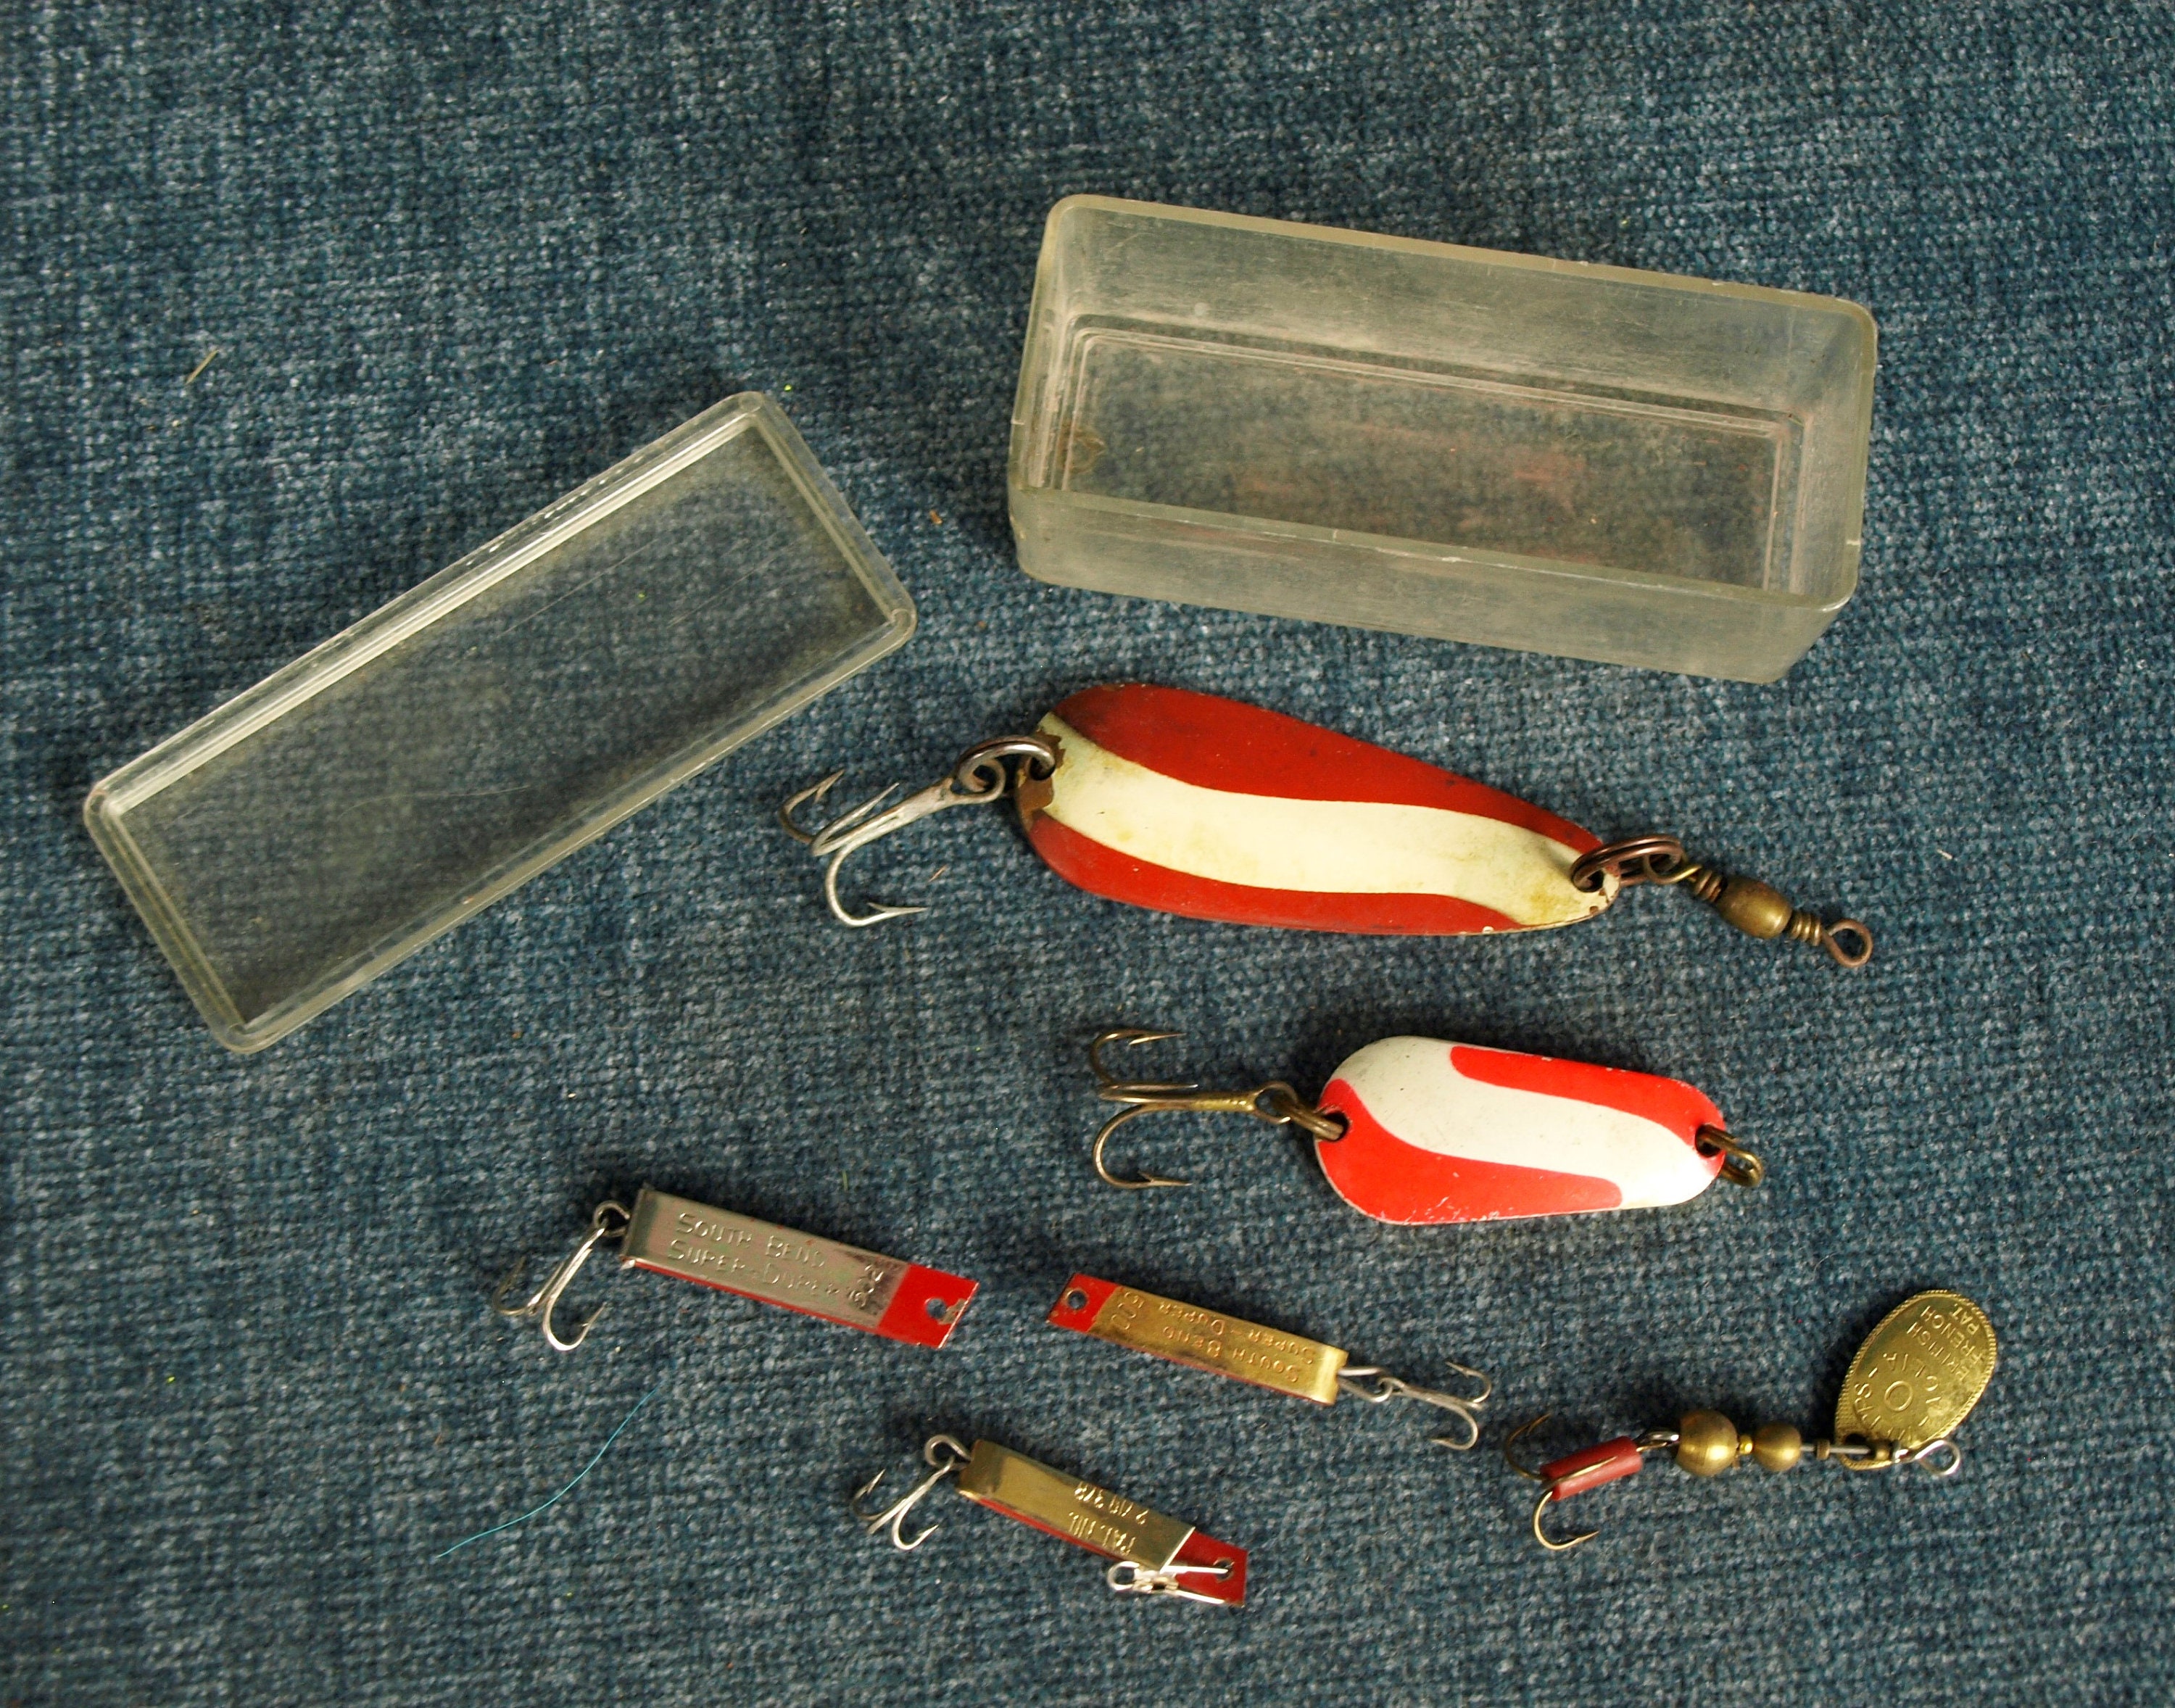 Vintage Luhr Jensen Red and White Spoon Lure, Mepps Aglia British French  Pat Small Lure, and South Bend Super Duper 502 & 500 -  India